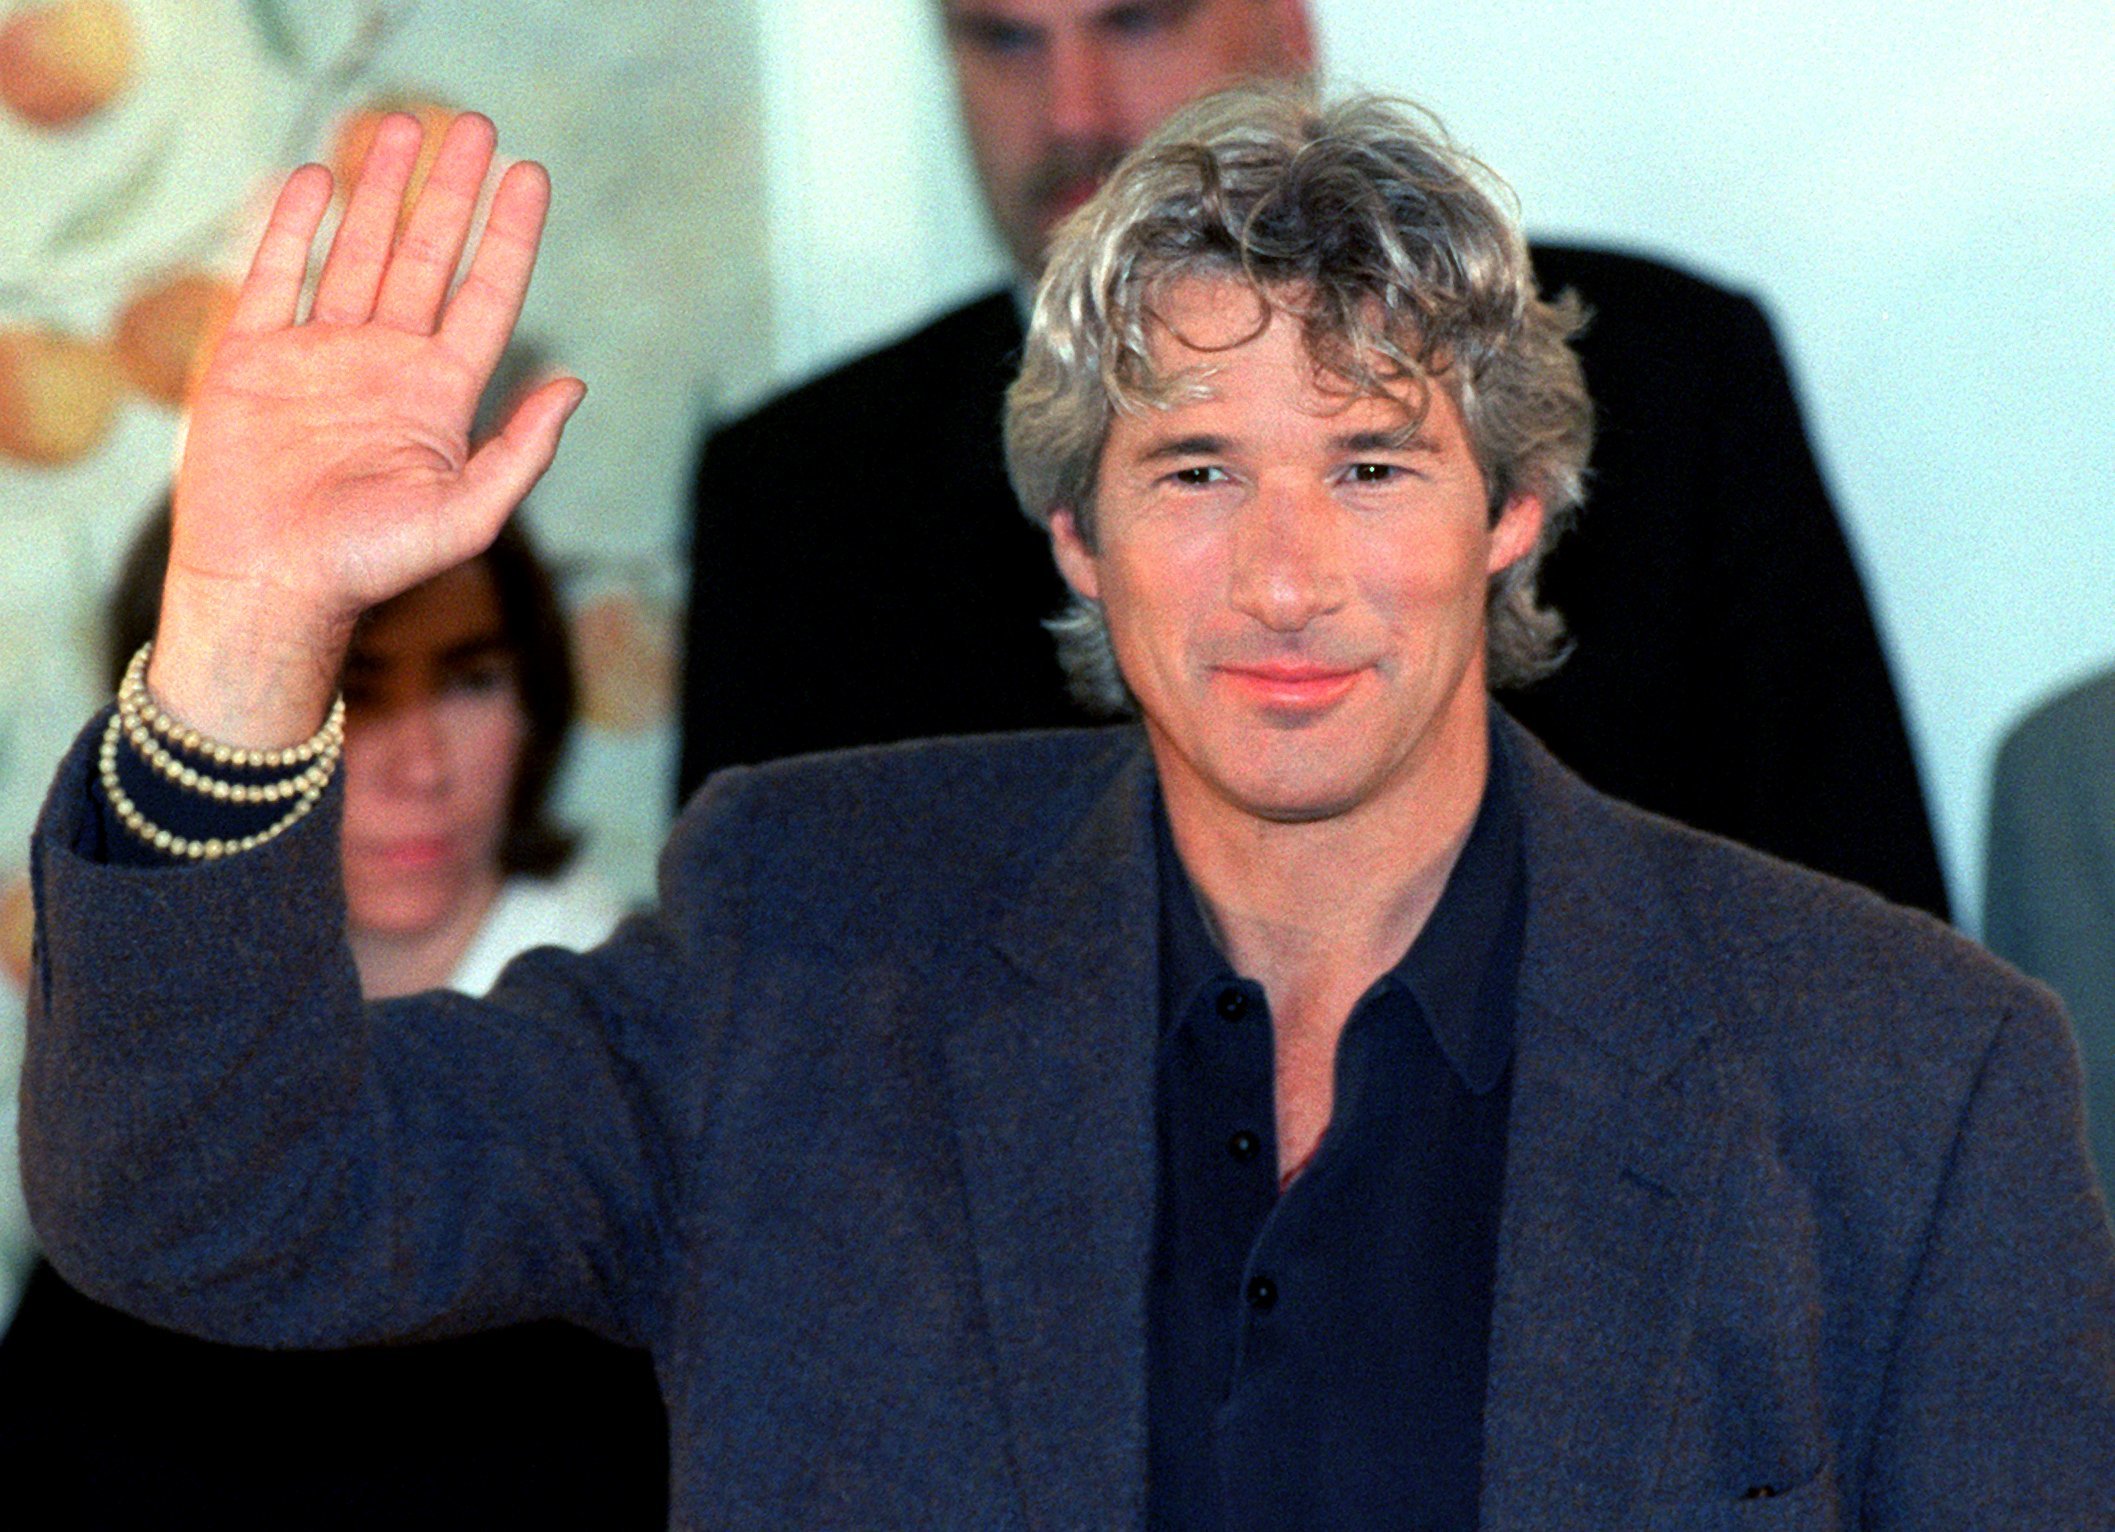 Richard Gere in Hamburg, Germany in 1996 | Source: Getty Images